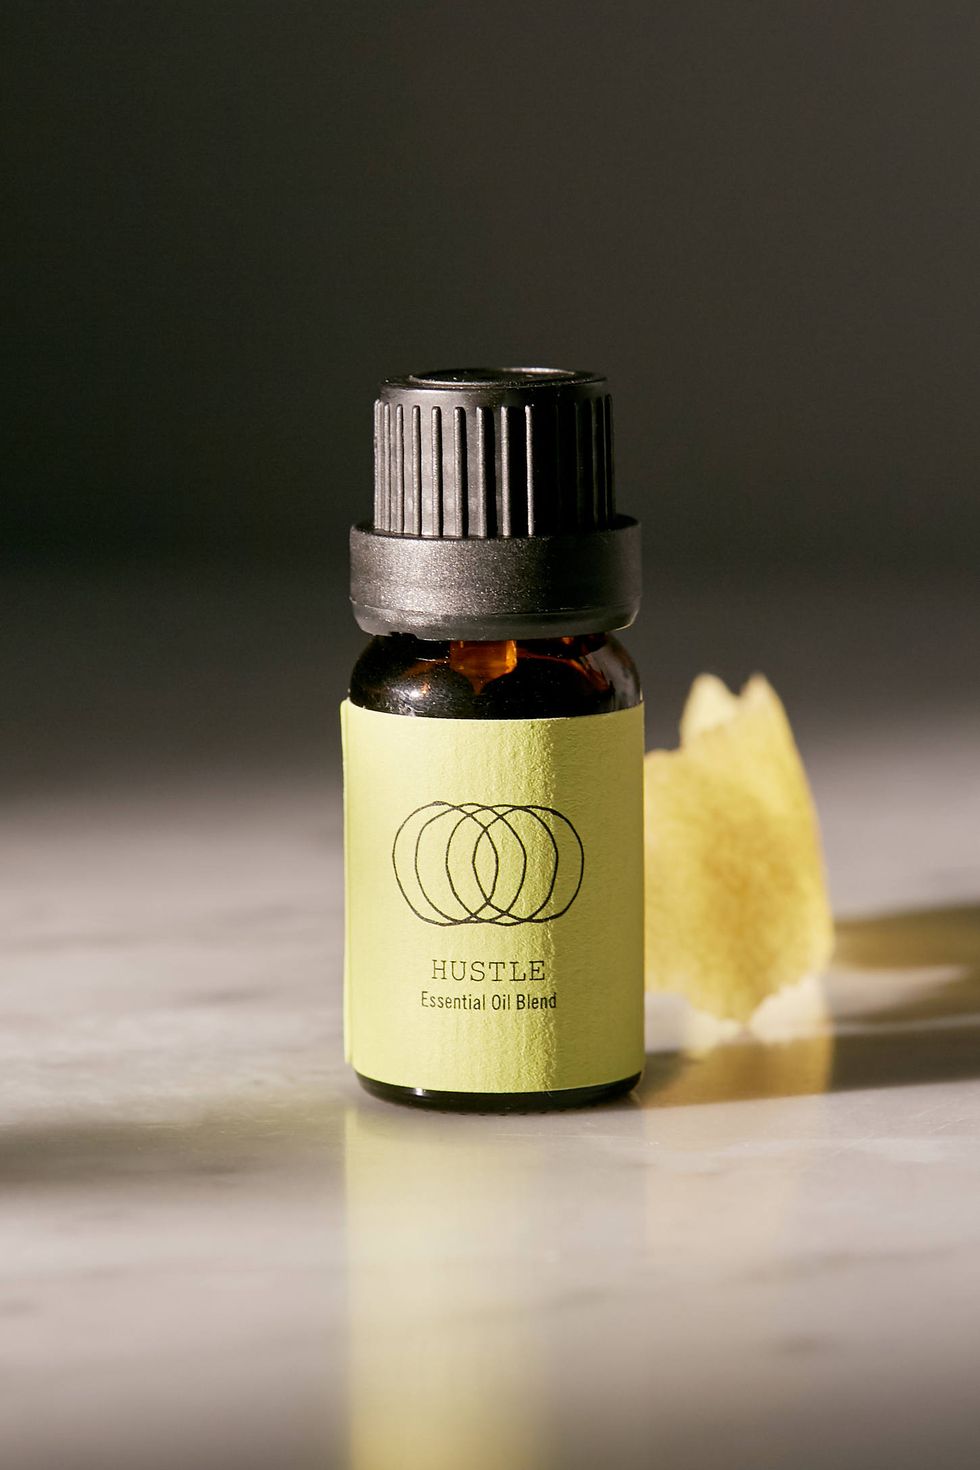 11 Christmas Essential Oils - Seasonal Scents for Essential Oil Diffuser